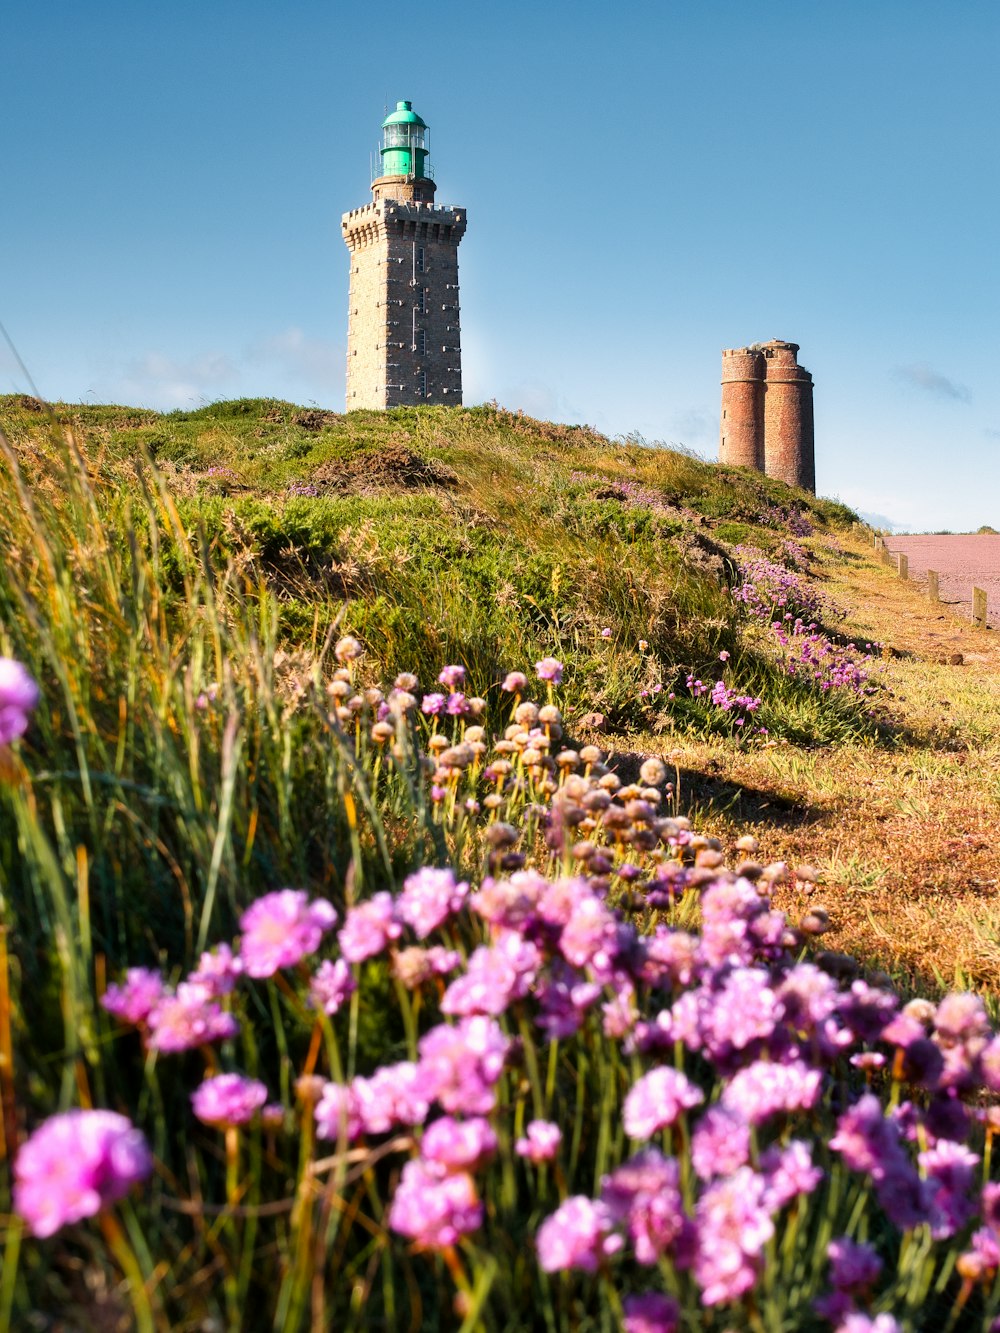 a lighthouse on a hill with purple flowers in the foreground